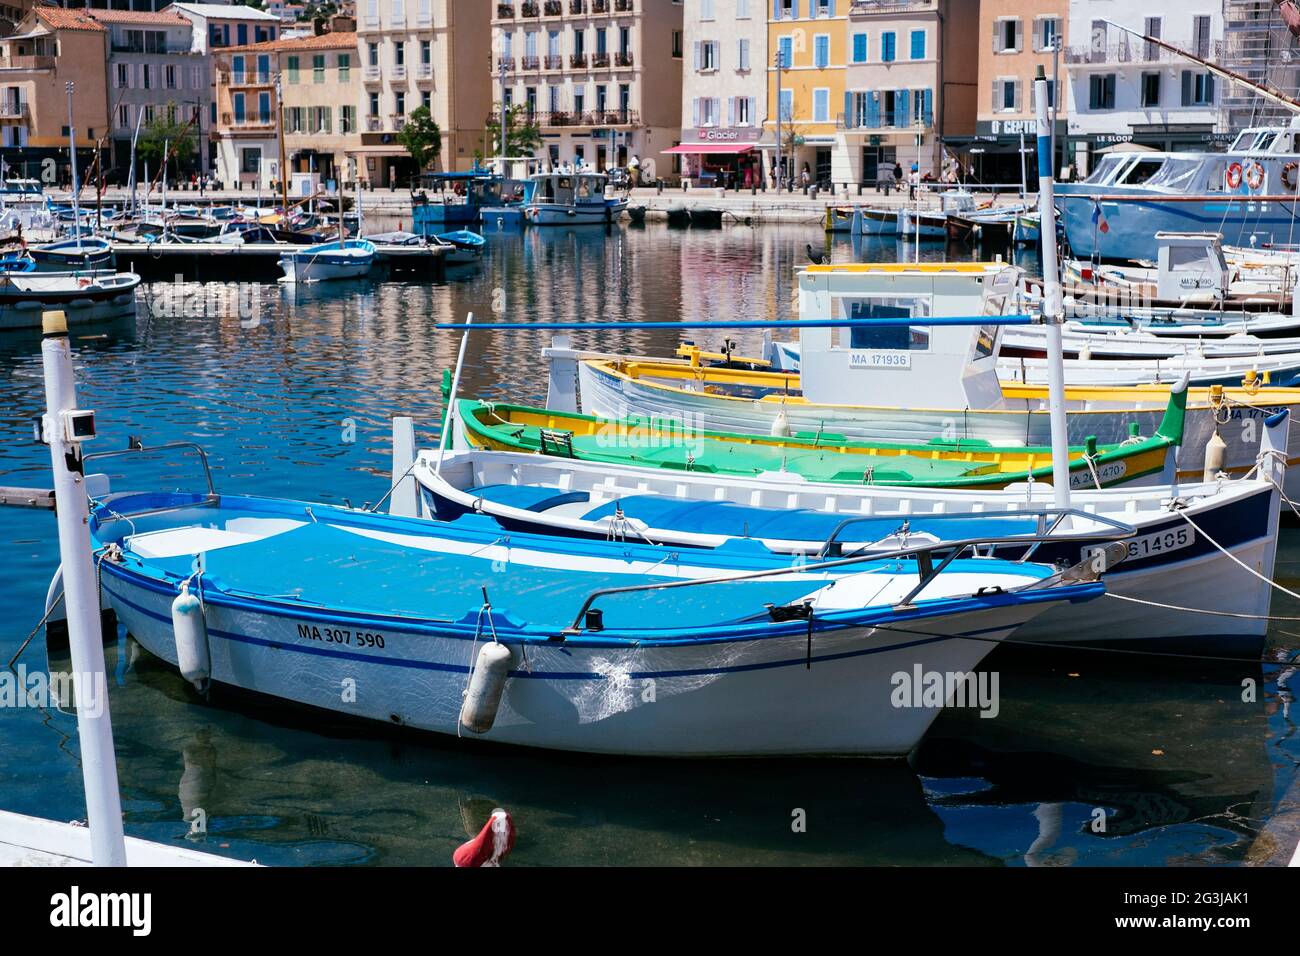 Boats in the harbour in La Ciotat, South of France Stock Photo